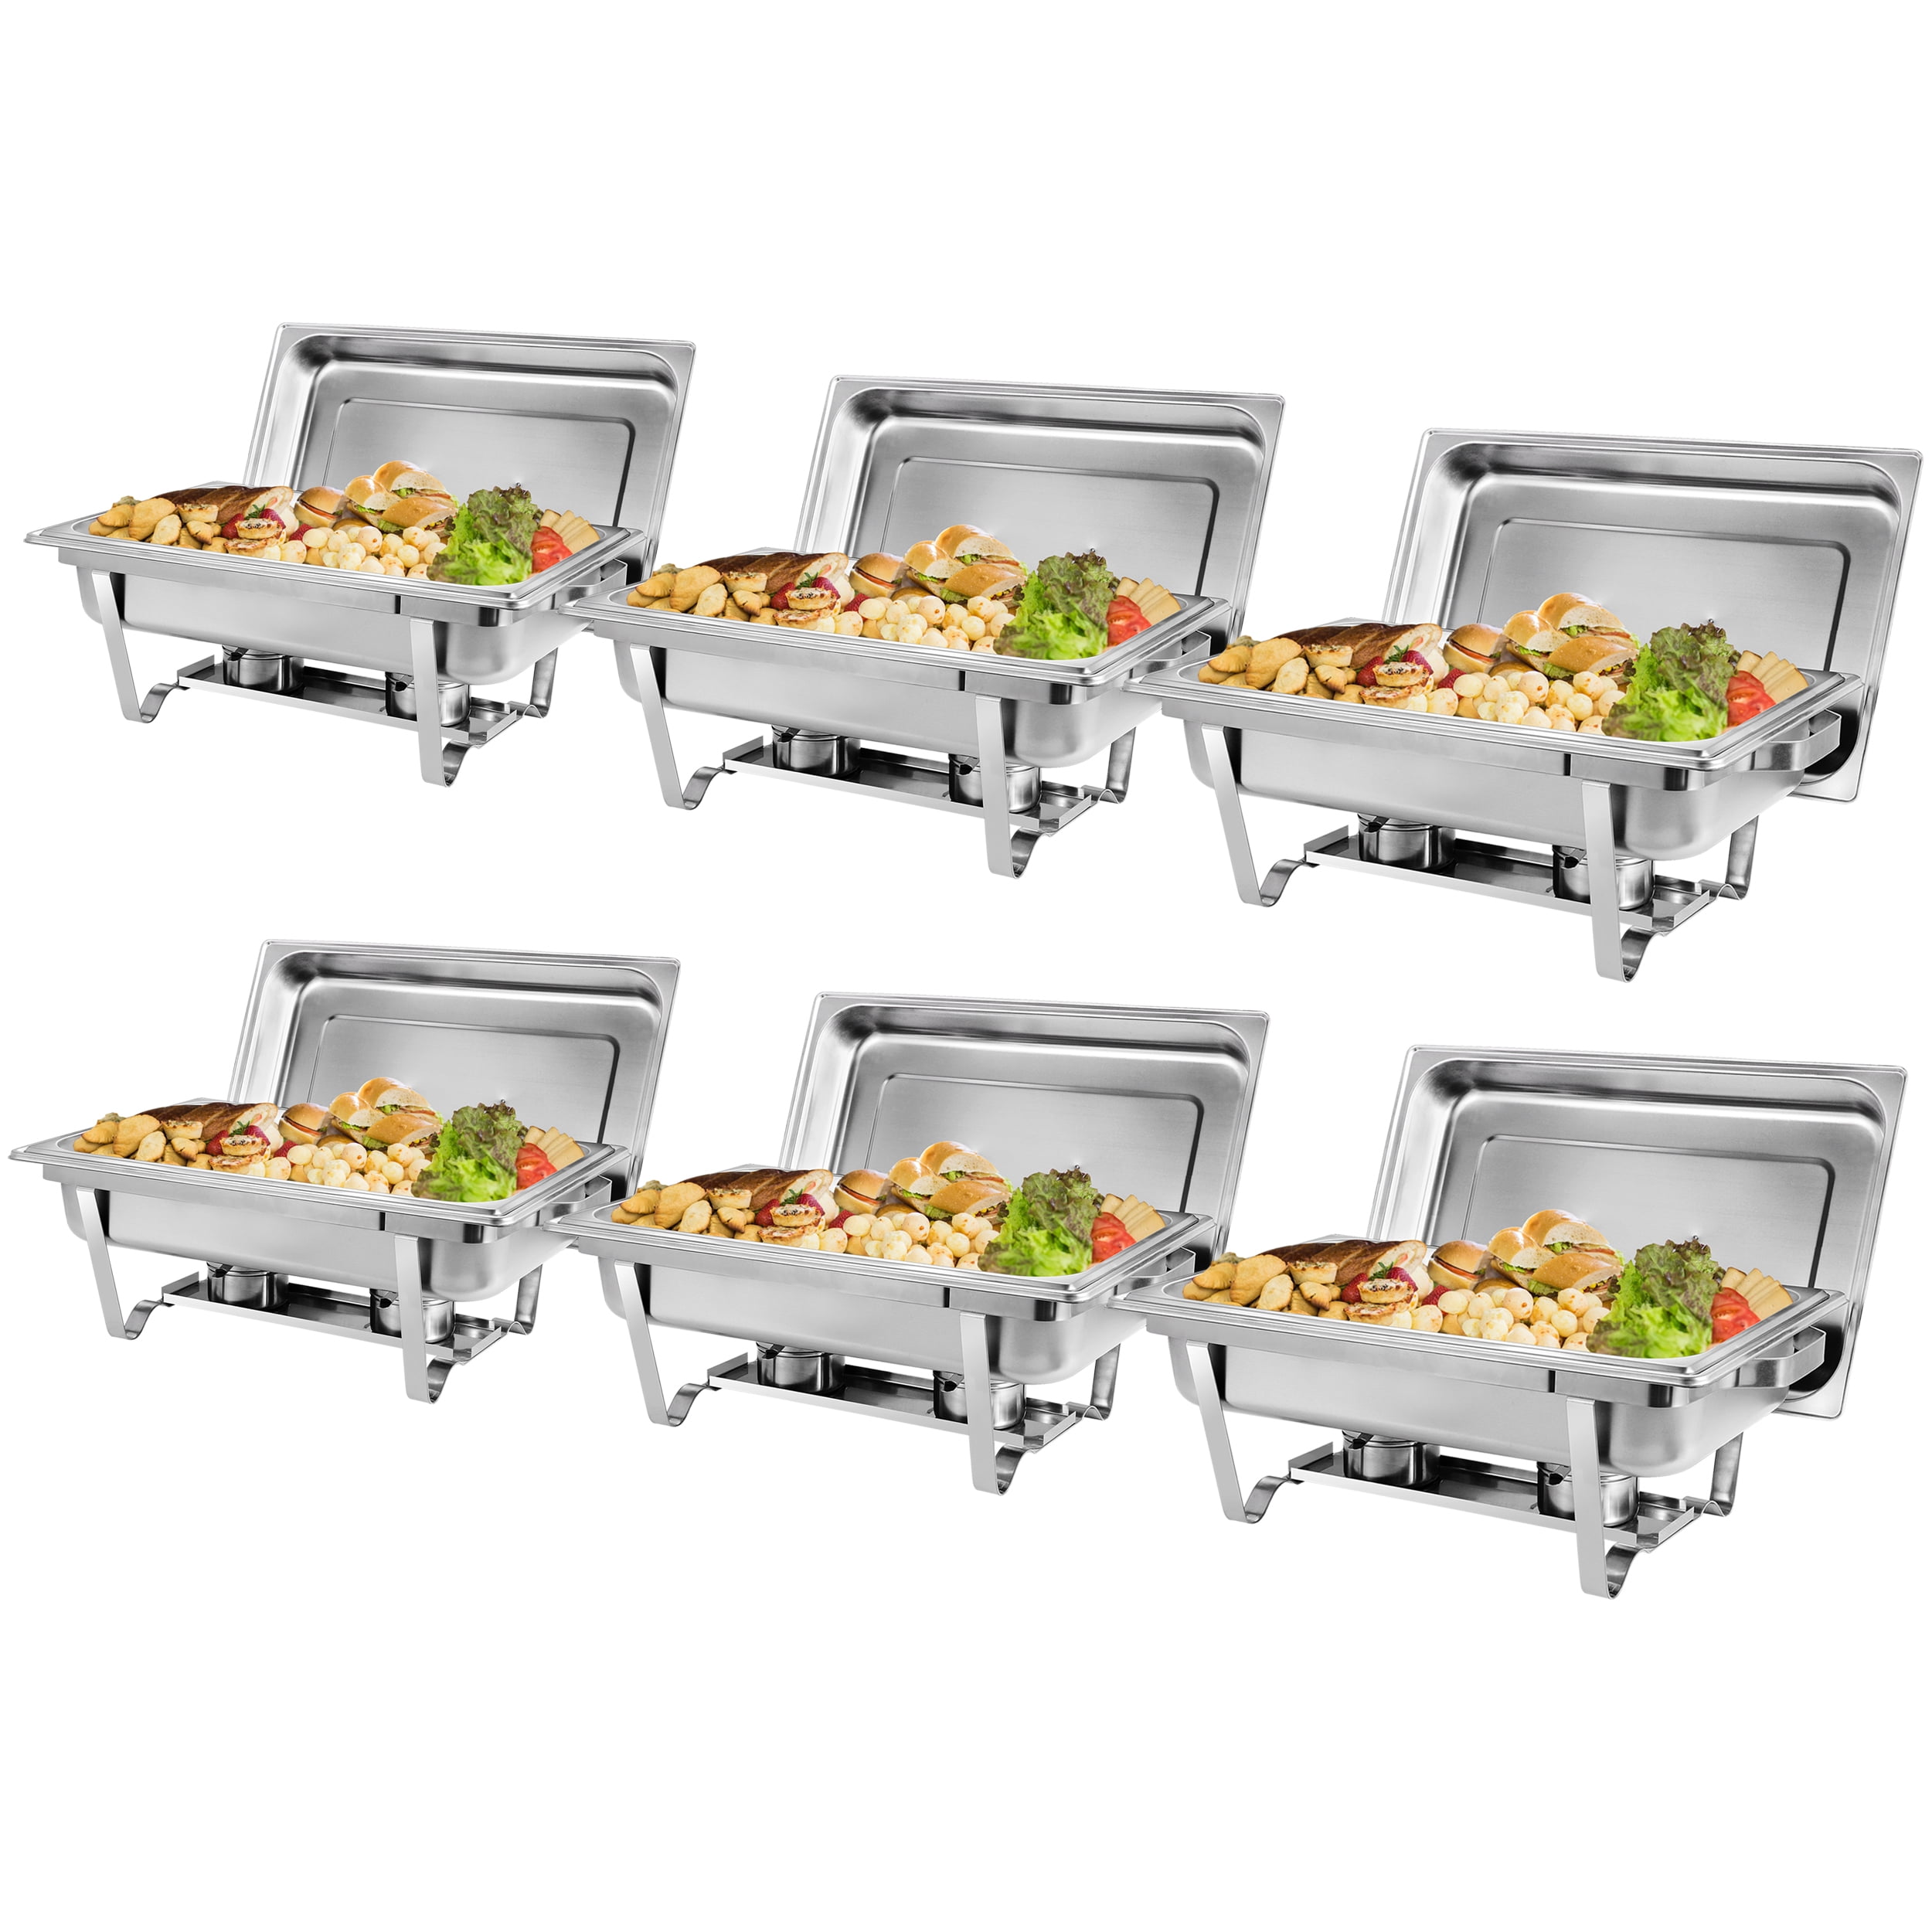 6 x Catering Stainless Steel Chafer Chafing Dish Sets 8QT Full Size Buffet Party 